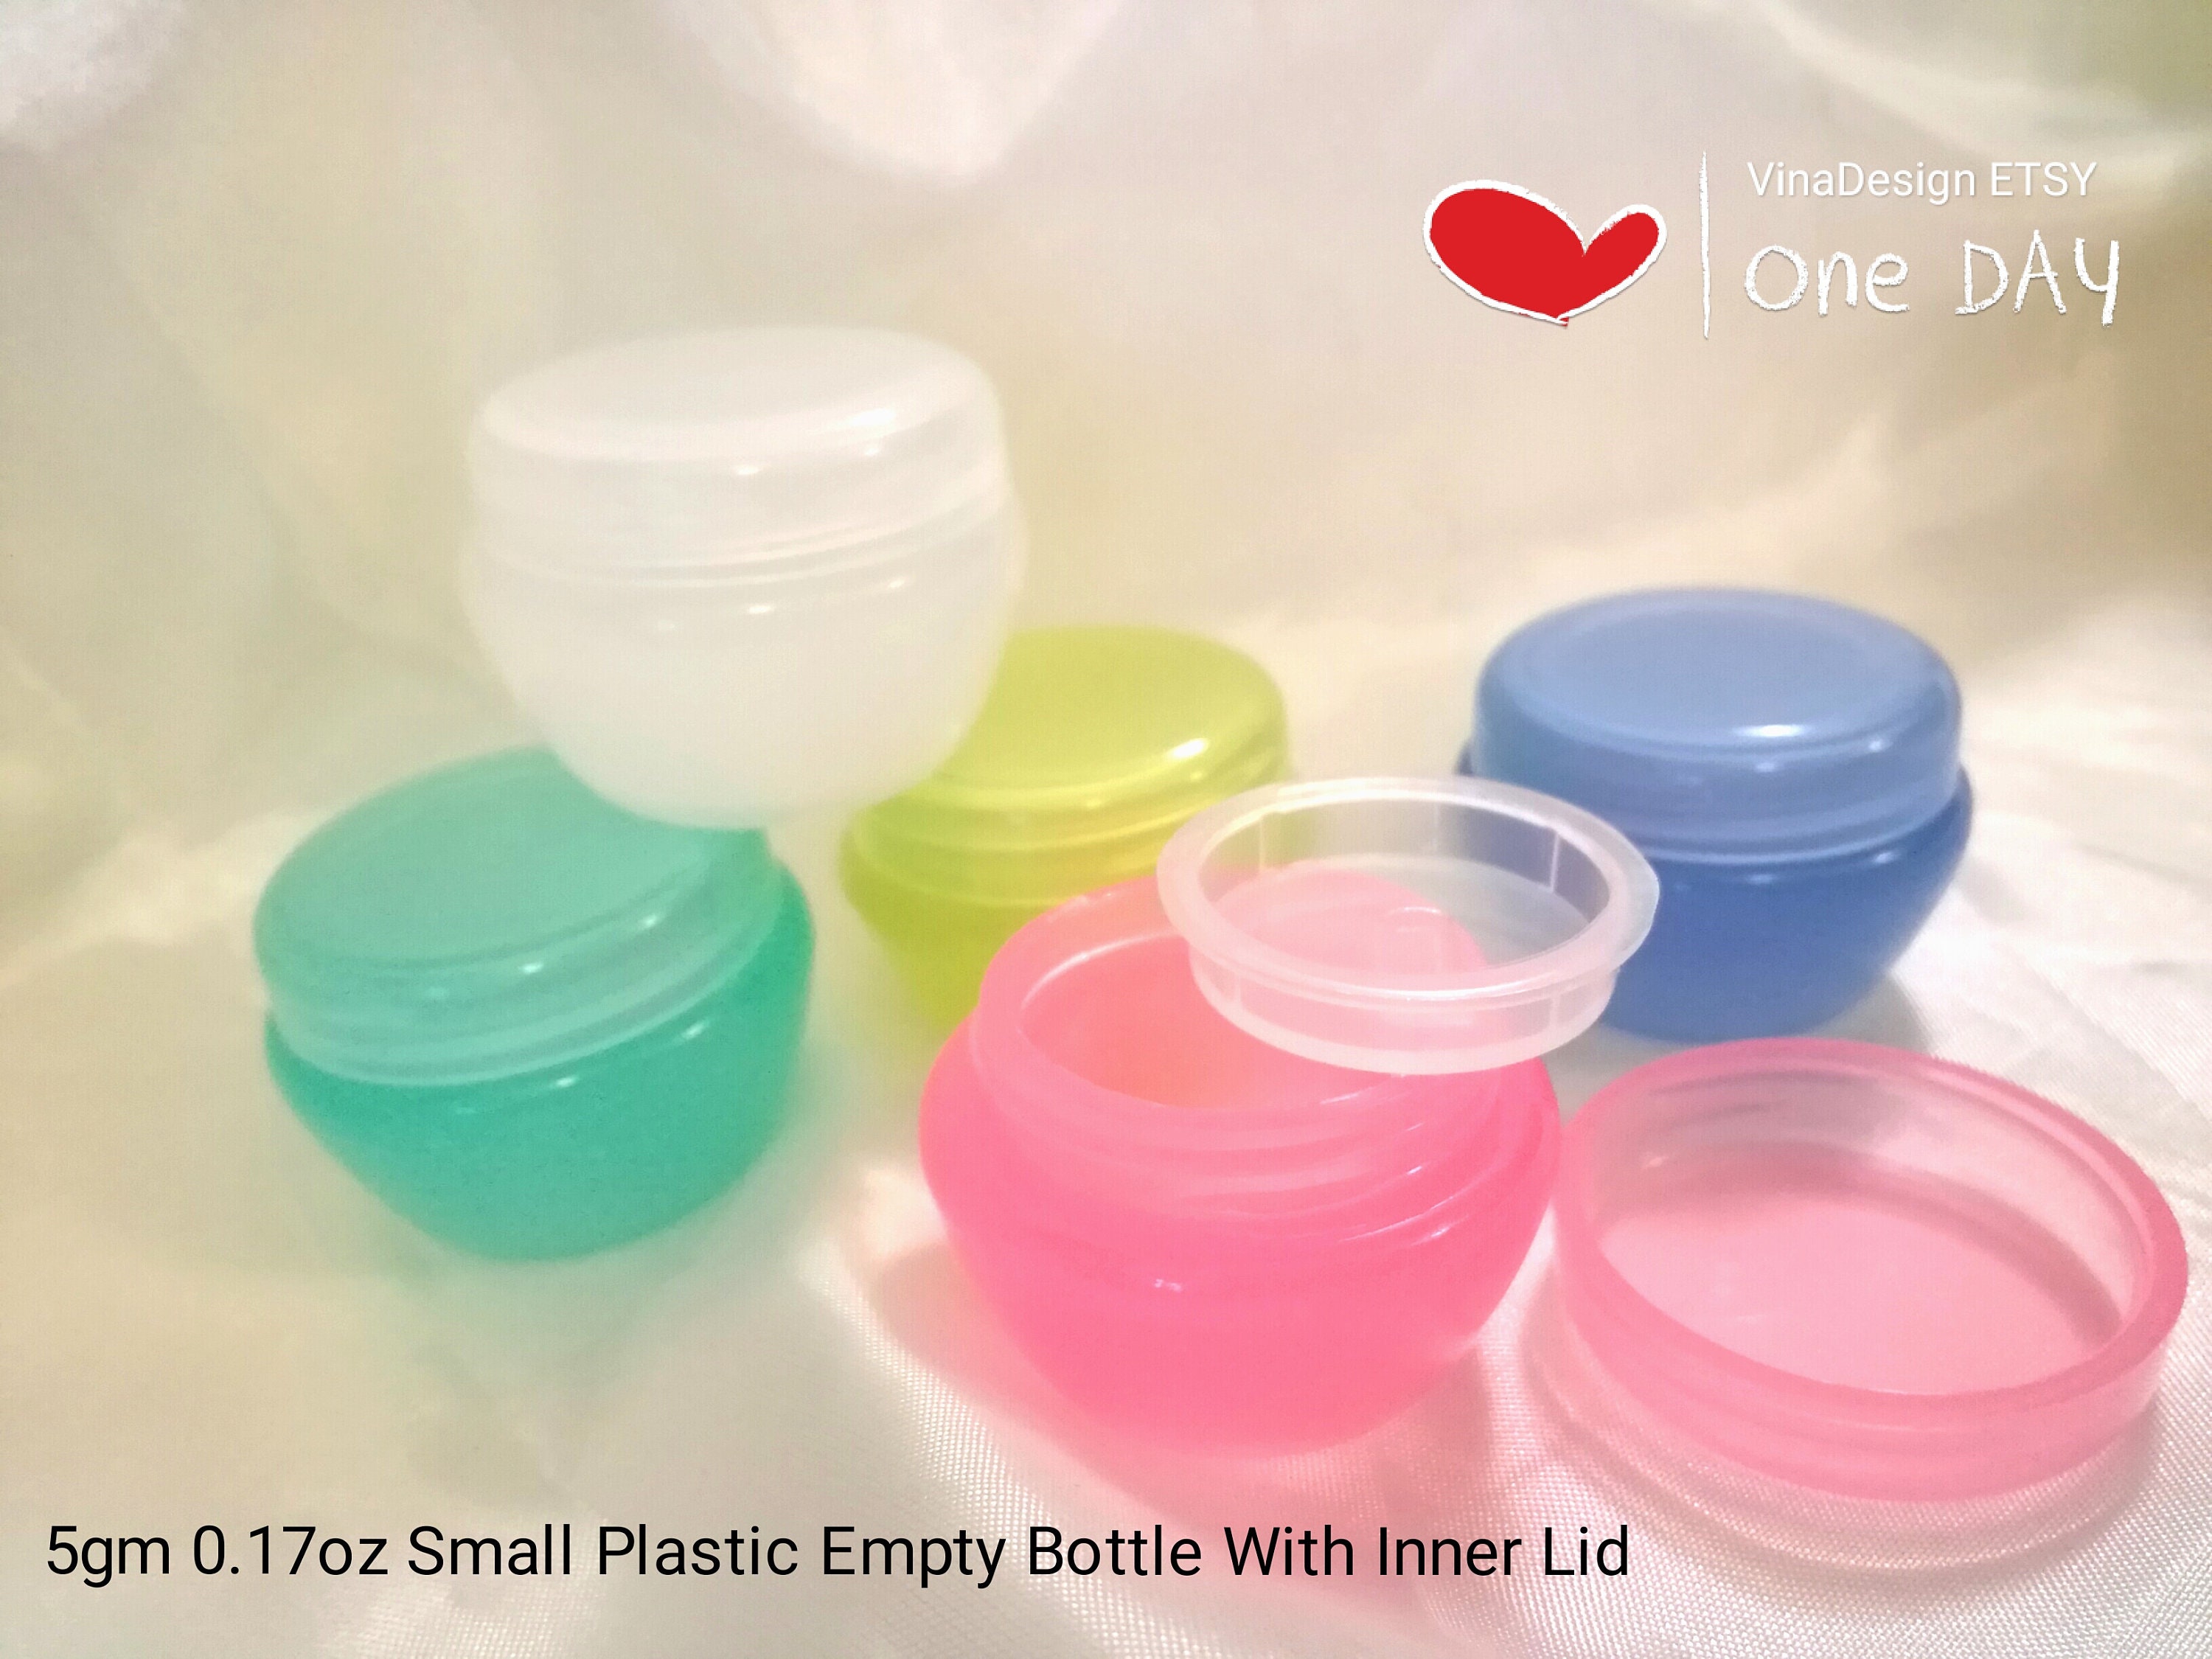 5gm 0.17oz Small Plastic Empty Bottle With Inner Lid Small